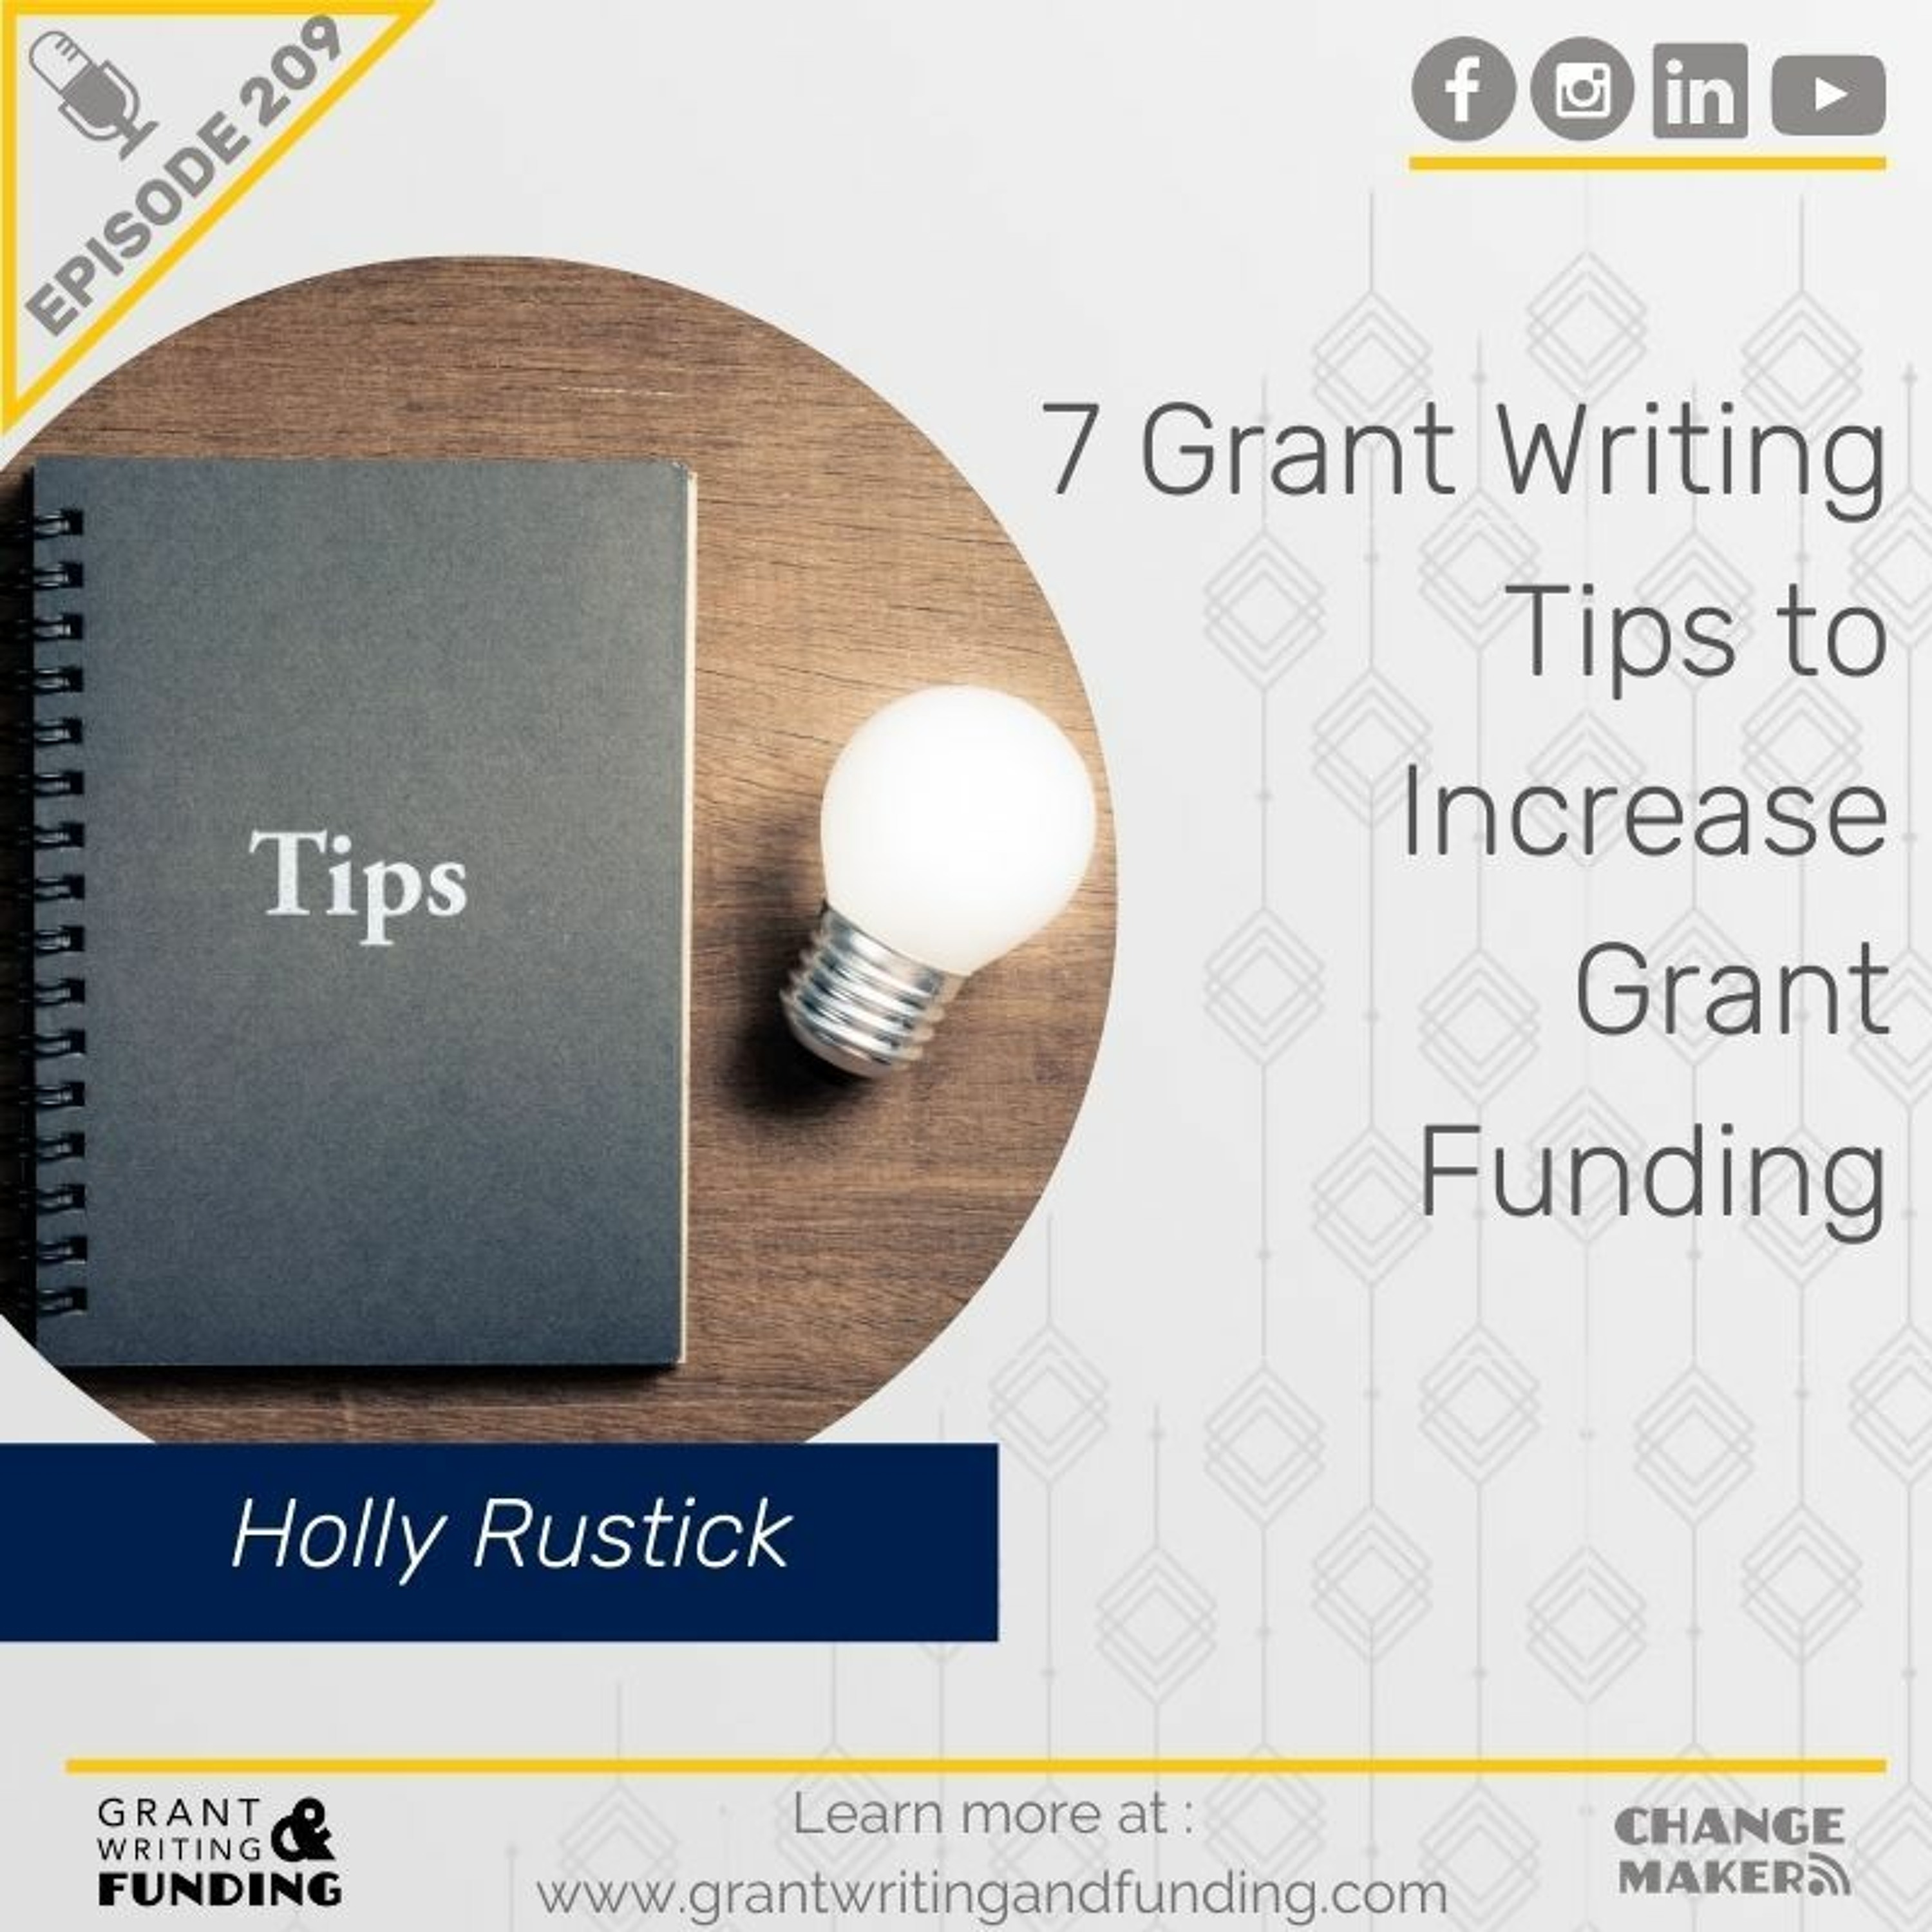 Ep. 209: 7 Grant Writing Tips to Increase Grant Funding